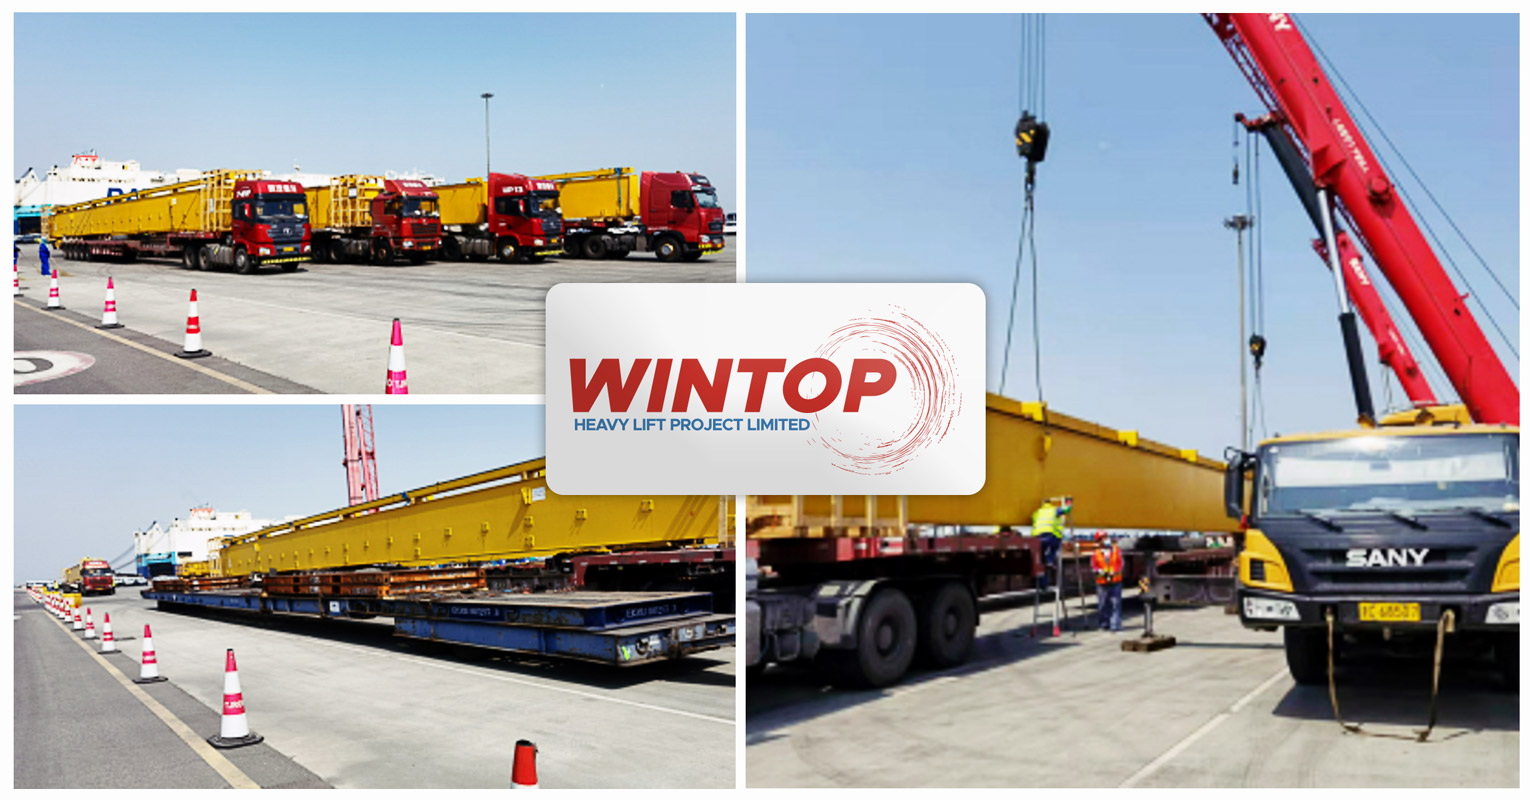 Wintop Heavy Lift Handled 32m Long Function Eletrode Supply Equipment Imported from Germany to Tianjin